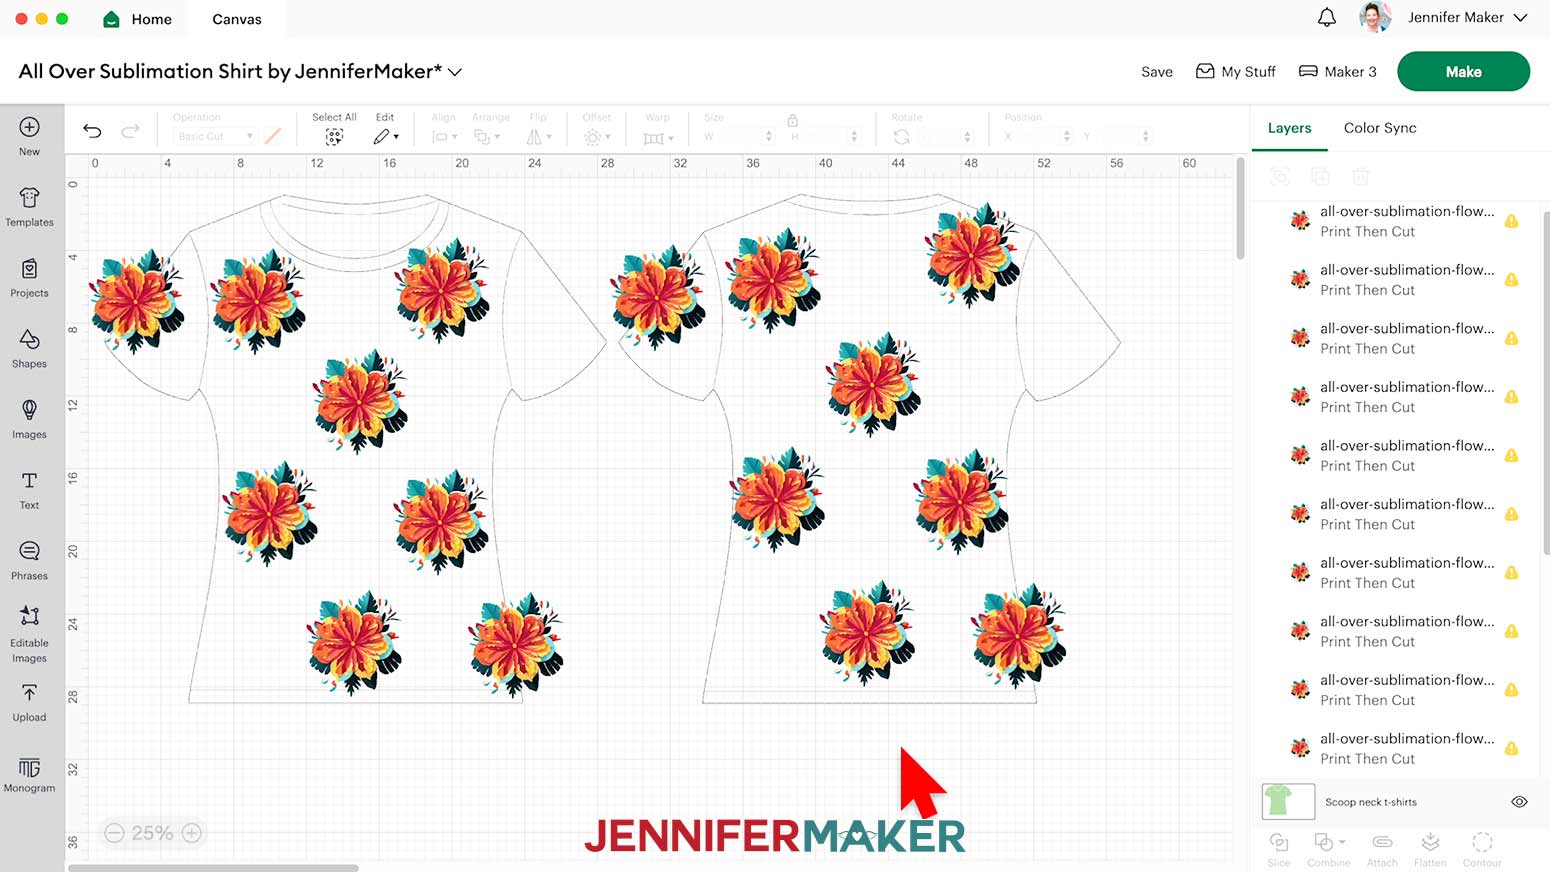 Click the “Duplicate” icon to make the amount of design repeats you want for the shirt. I will create 20 designs to cover my shirt’s front and back.